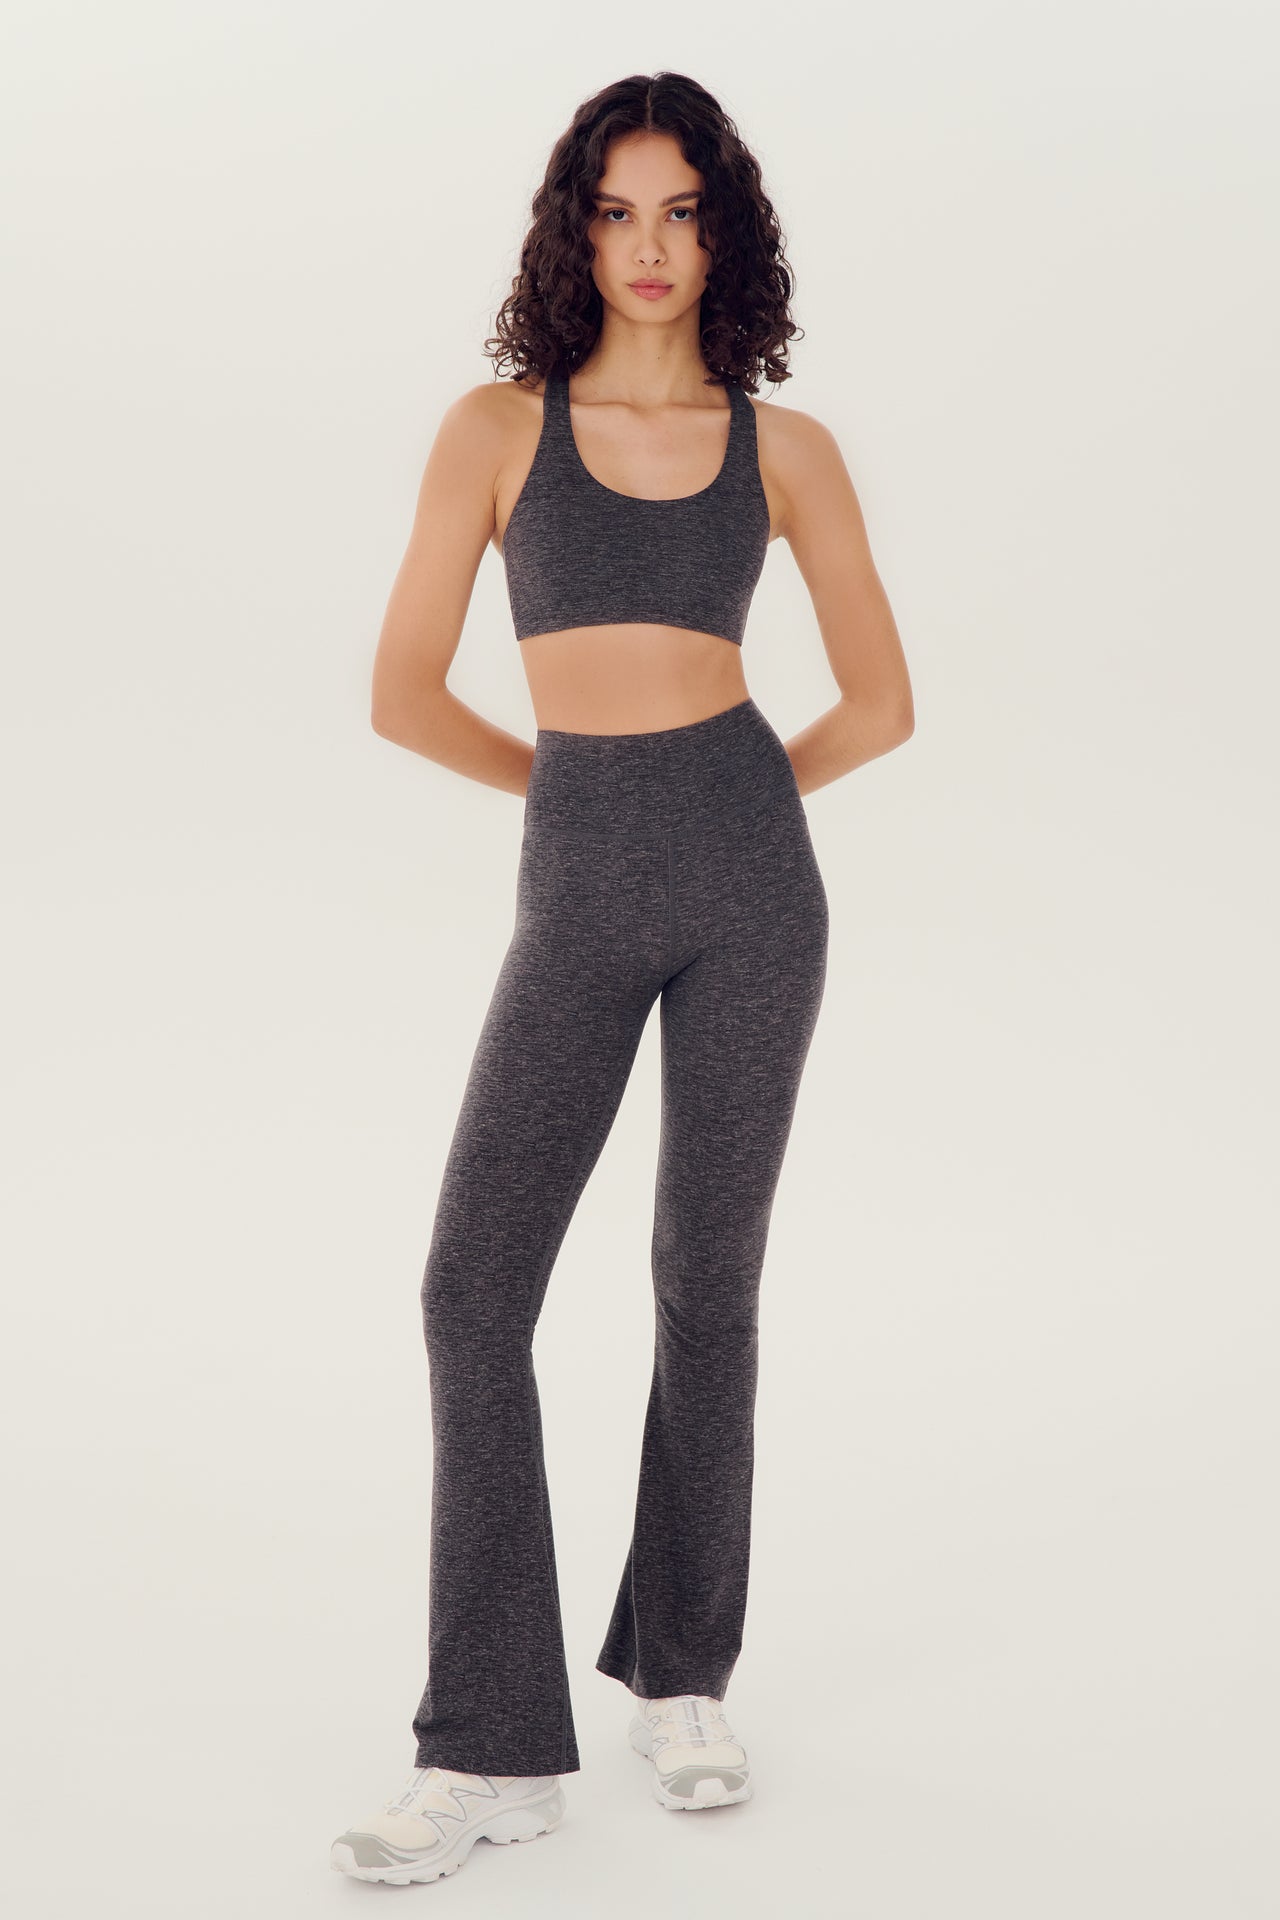 The model is wearing a grey crop top and Raquel High Waist Airweight Flare leggings in Heather Grey by SPLITS59, perfect for Pilates.